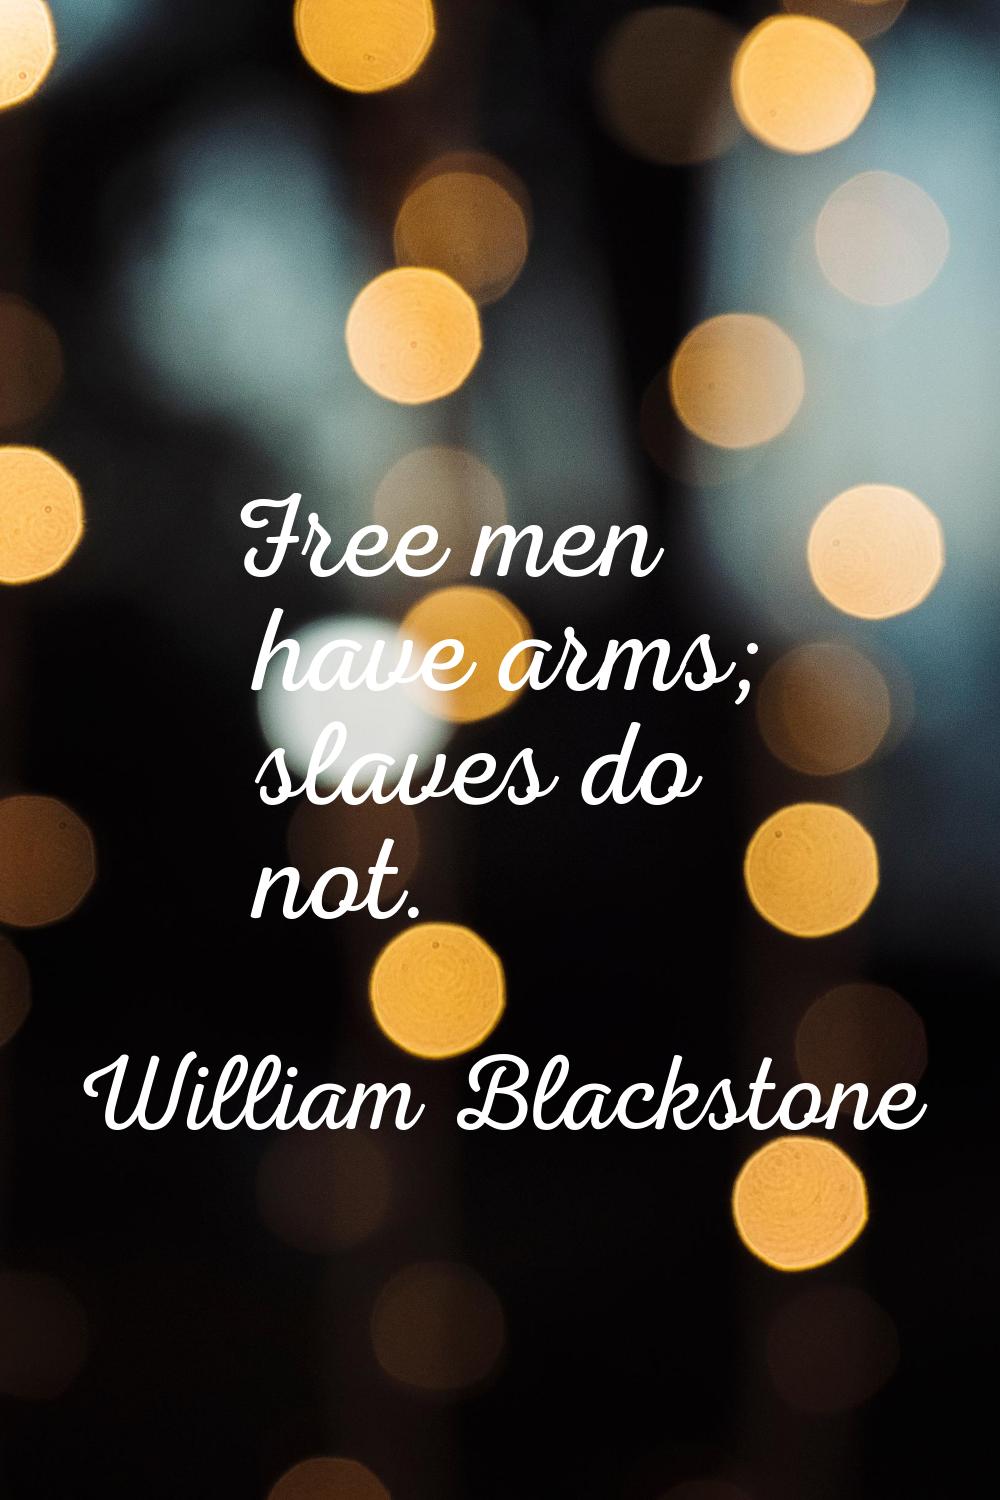 Free men have arms; slaves do not.